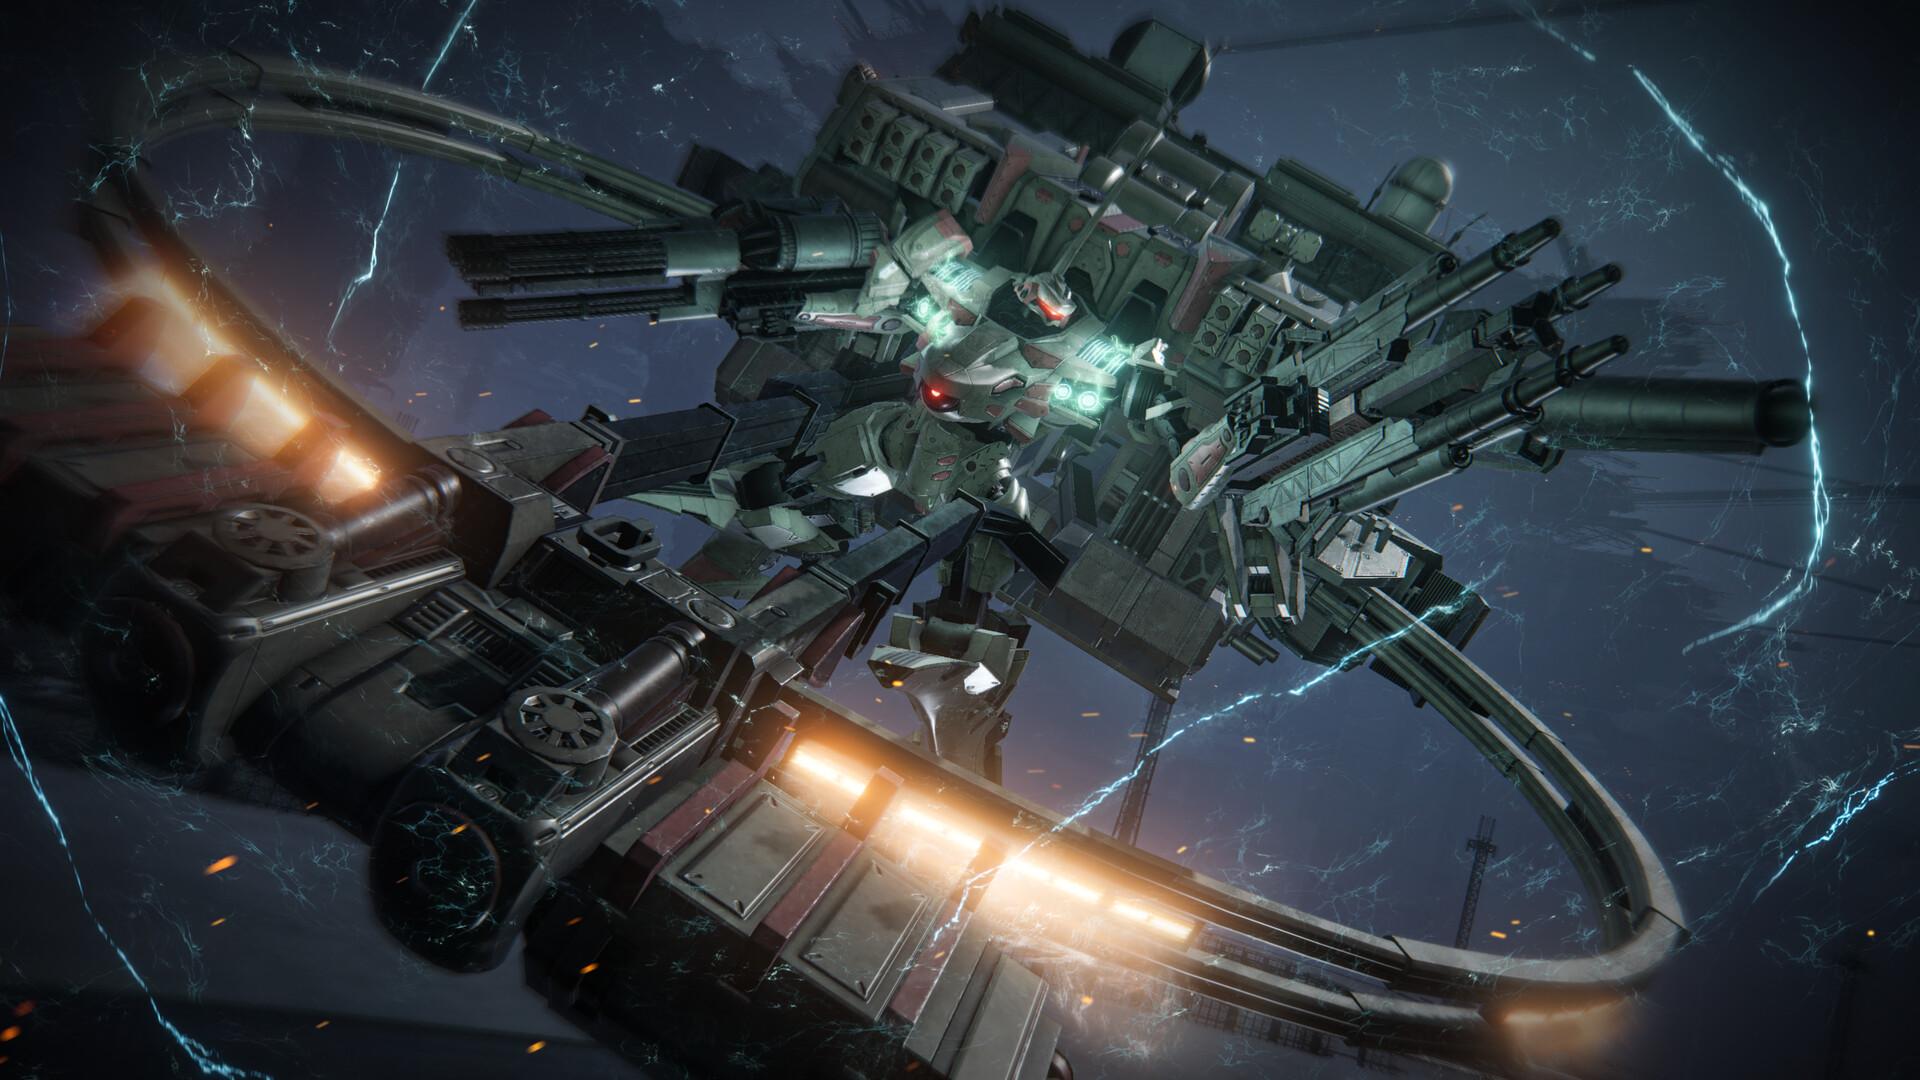 From Software Unveils Armored Core VI: Fires Of Rubicon - Game